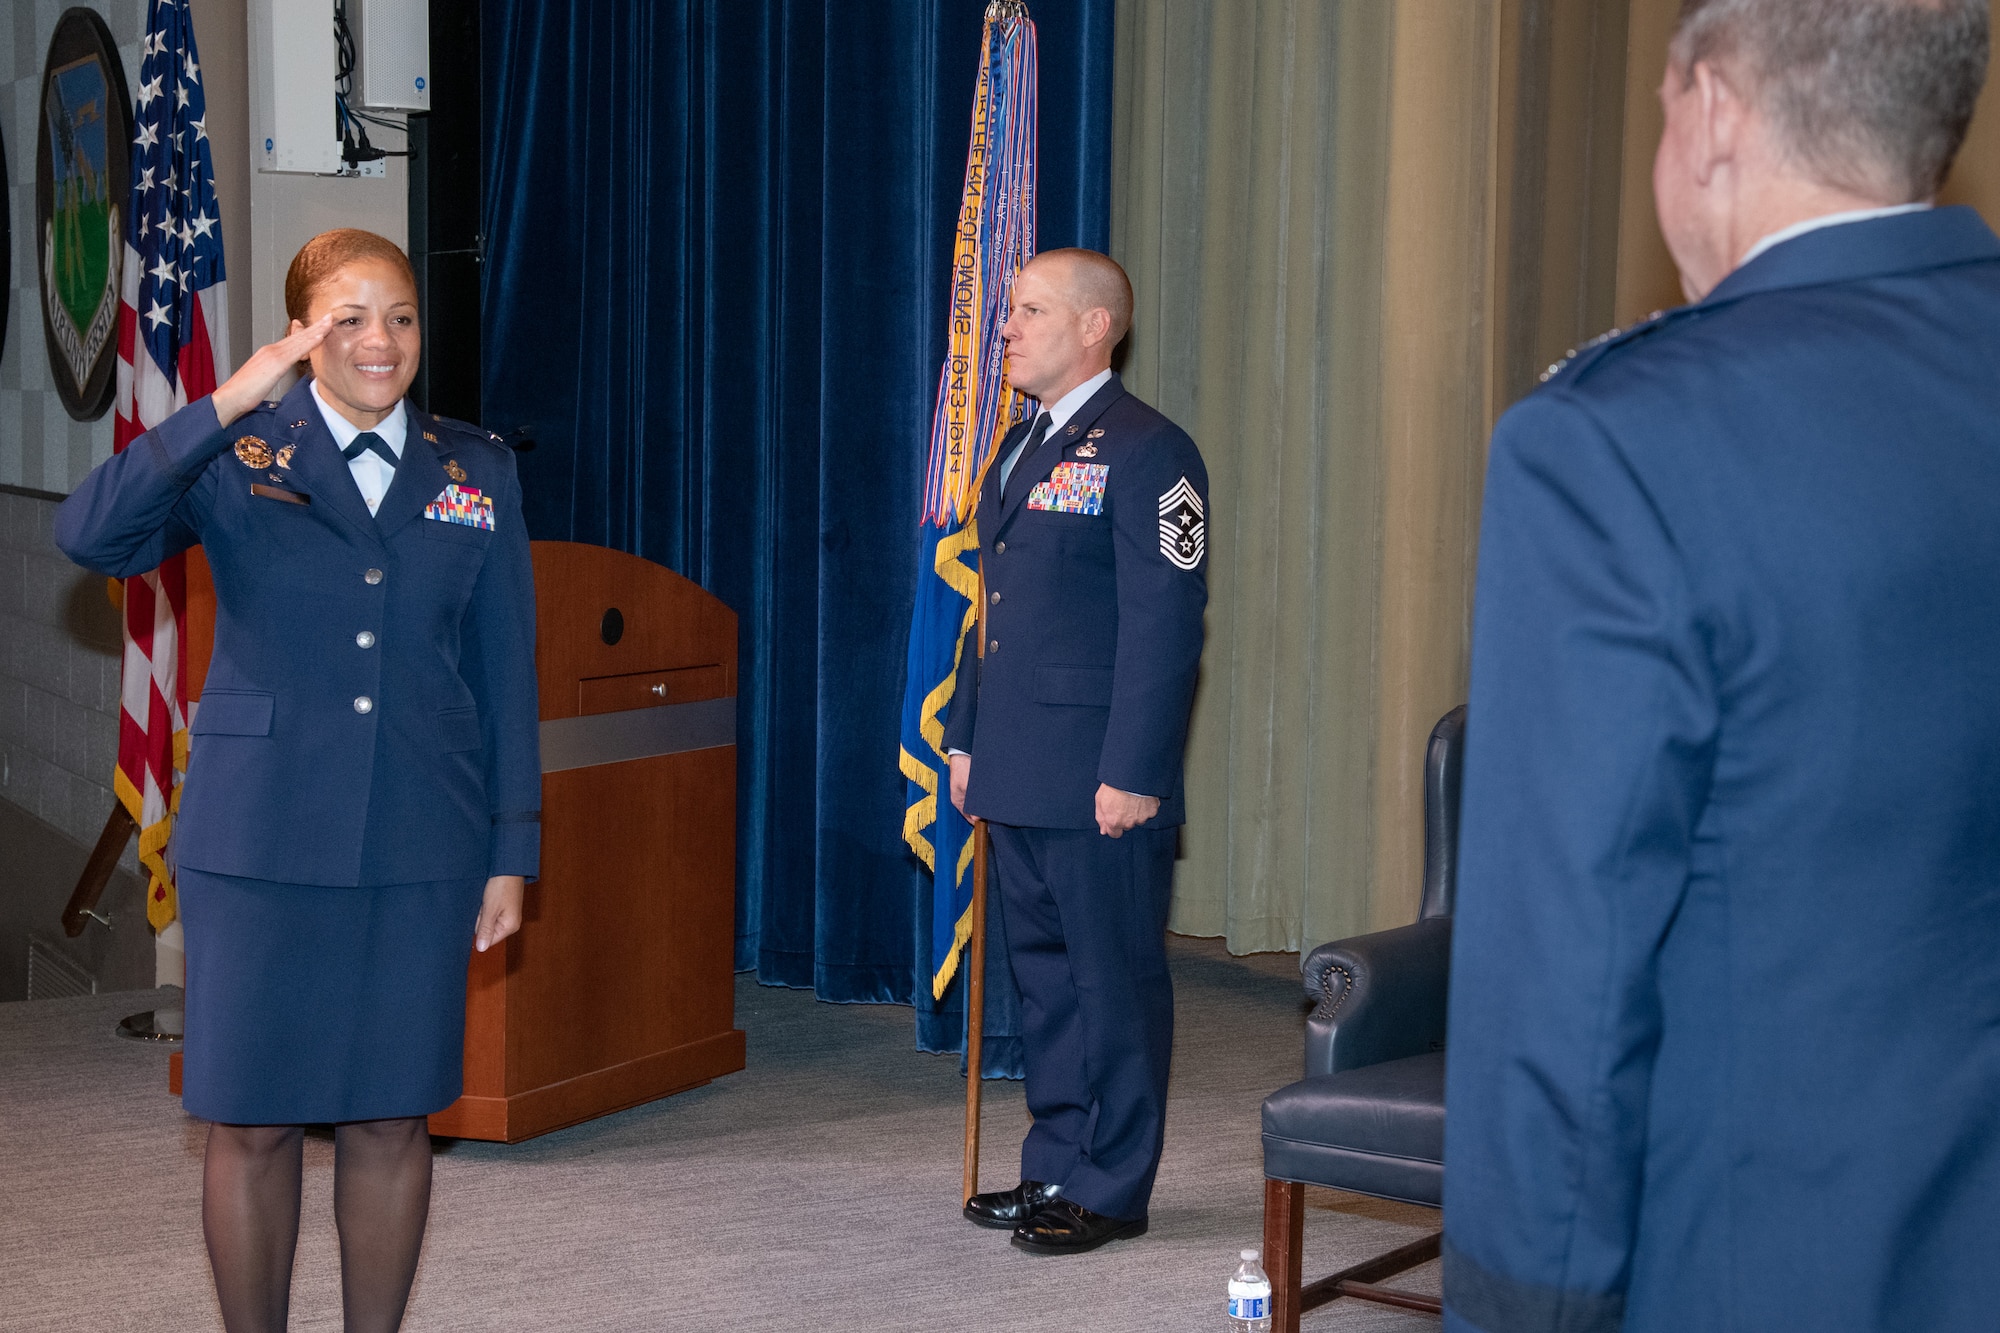 Colonel Patrick J. Carley relinquishes command of the 42nd Air Base Wing to Col. Eries L. G. Mentzer, Aug. 24, 2020, at Maxwell Air Force Base, Alabama. The ceremony was presided over by Lt. Gen. James Hecker, Air University commander and president. (U.S. Air Force photo by Trey Ward)